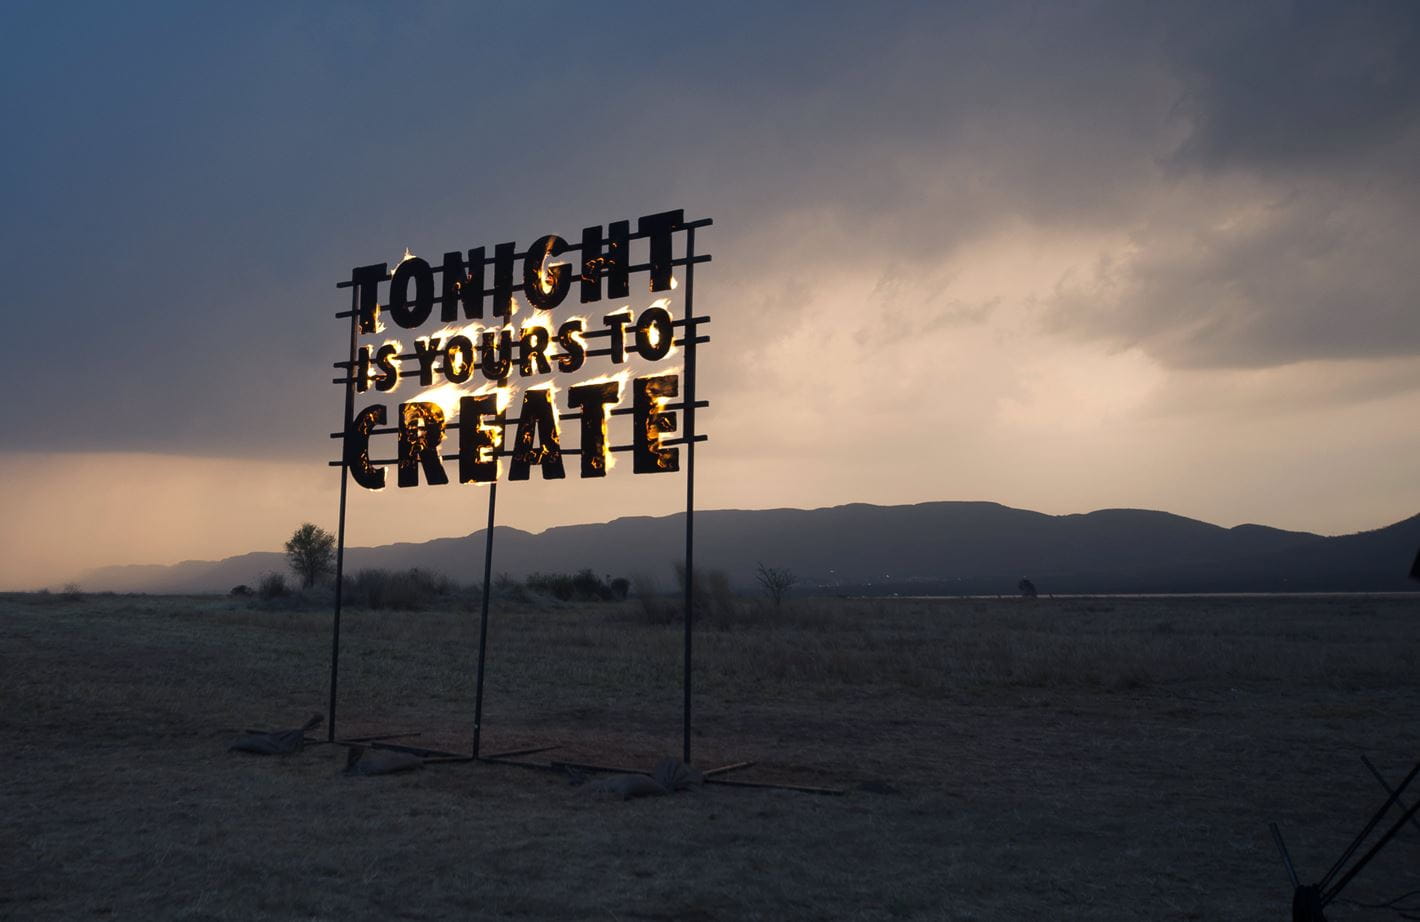 Nights by Absolut in Johannesburg